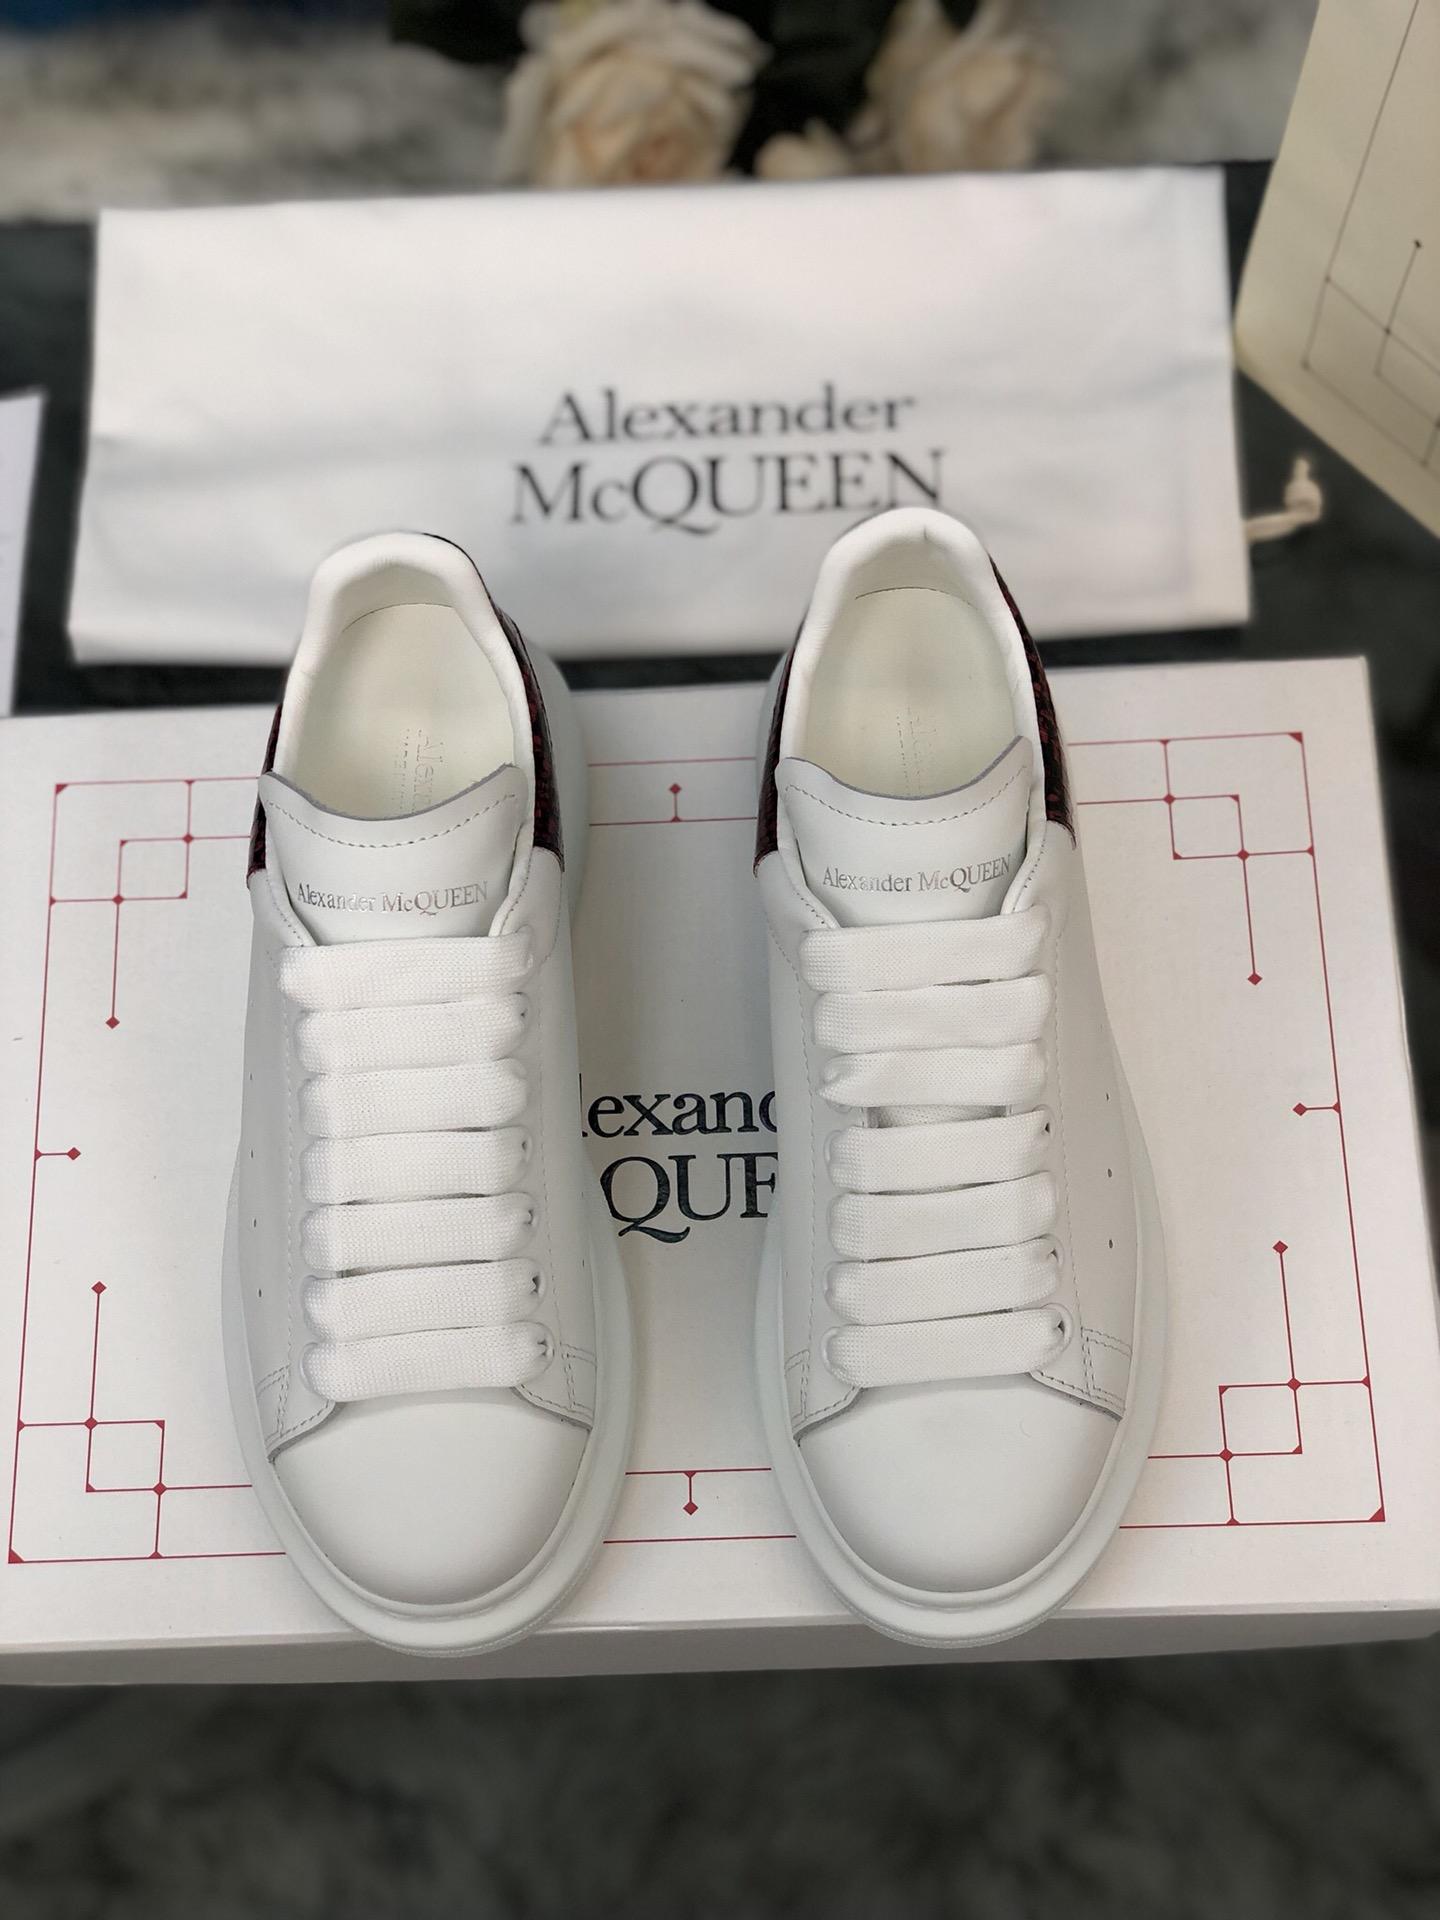 Alexander McQueen Fahion Sneakers White with Black red snake heel MS100007